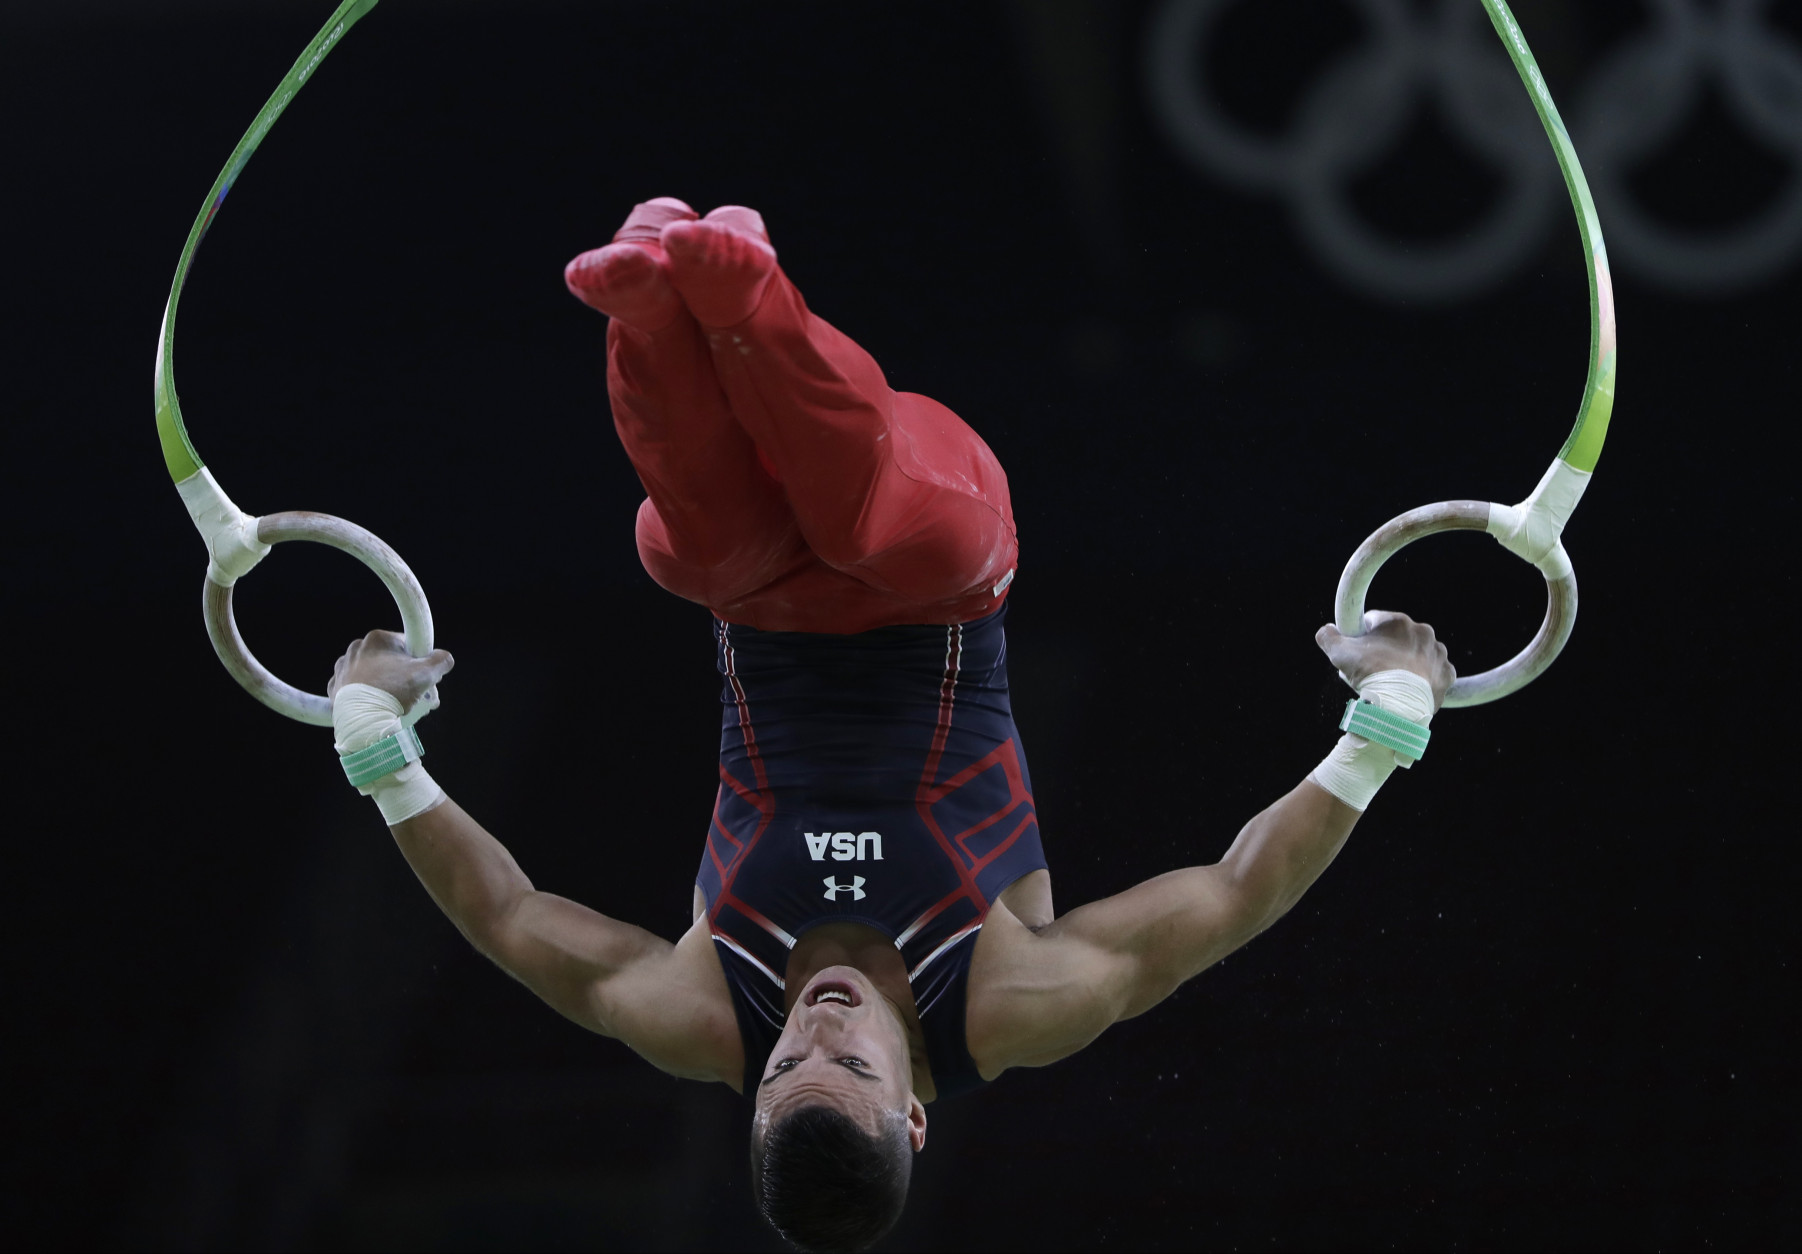 Gymnast from the United States Jacob Dalton trains on the rings ahead of the 2016 Summer Olympics in Rio de Janeiro, Brazil, Wednesday, Aug. 3, 2016. (AP Photo/Dmitri Lovetsky)